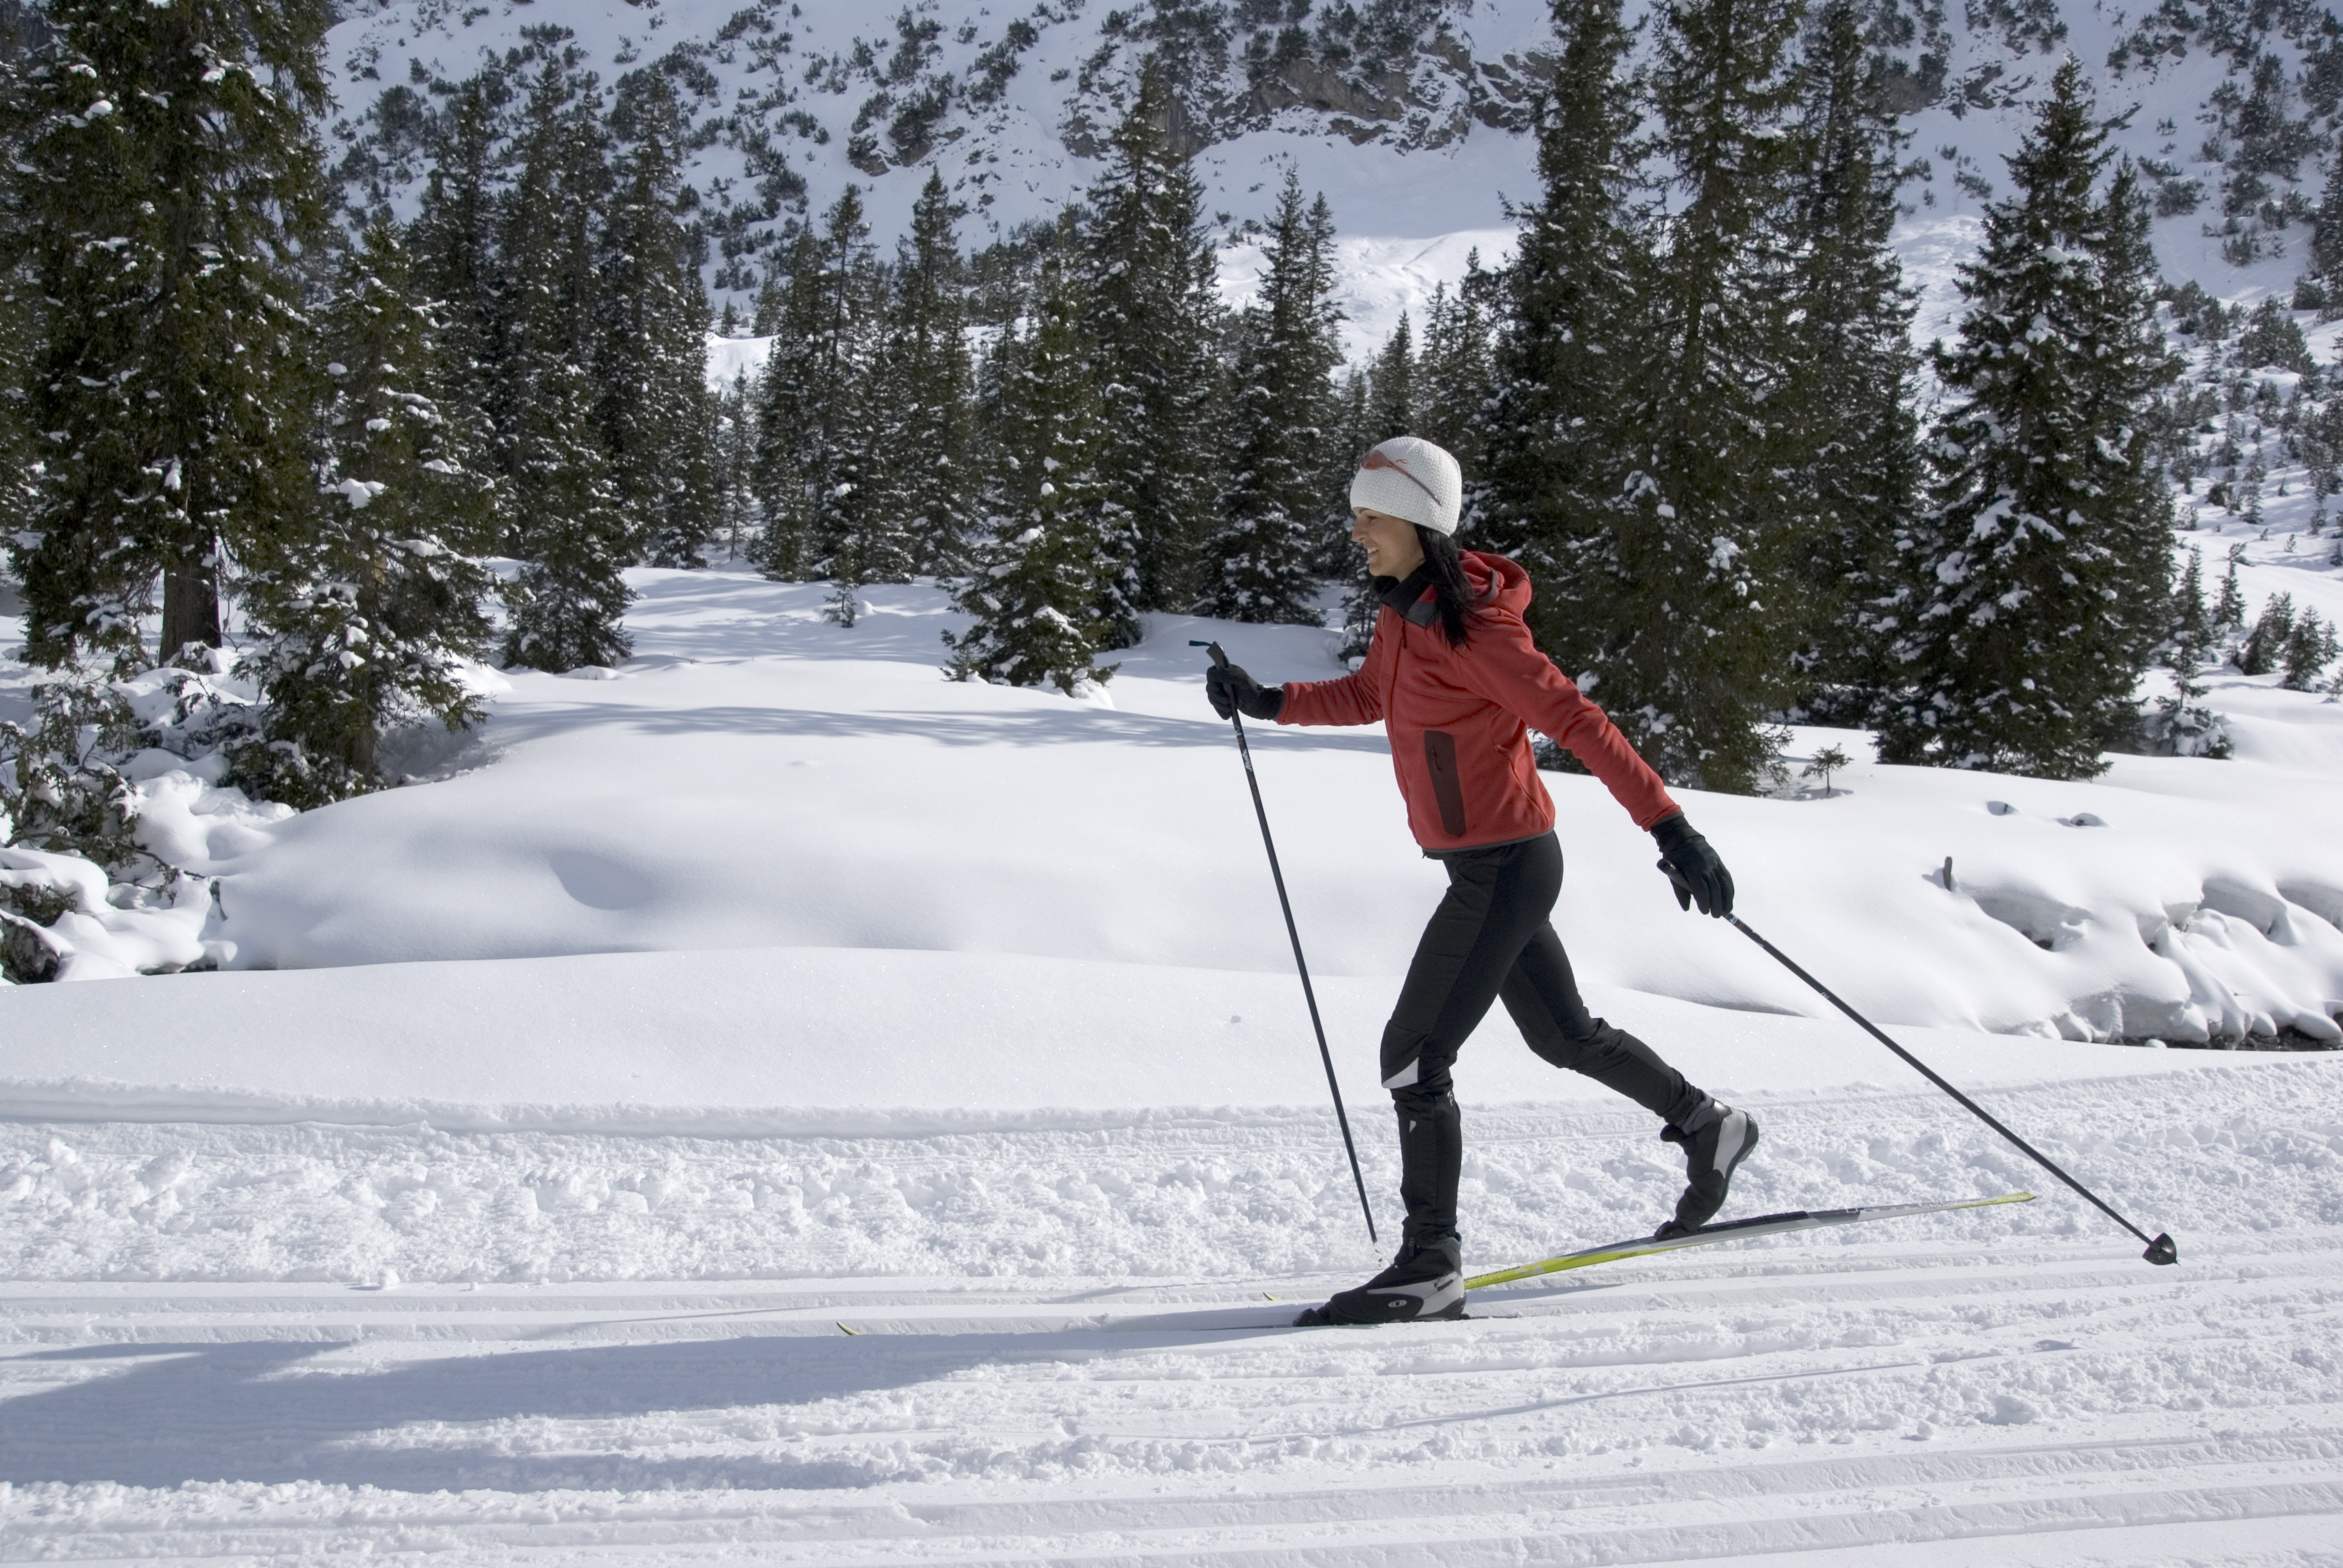 Skiing cross country skis. Фитнес лыжи. Cross Country Skiing. Cross-Country Ski Trails. Ski Trails.